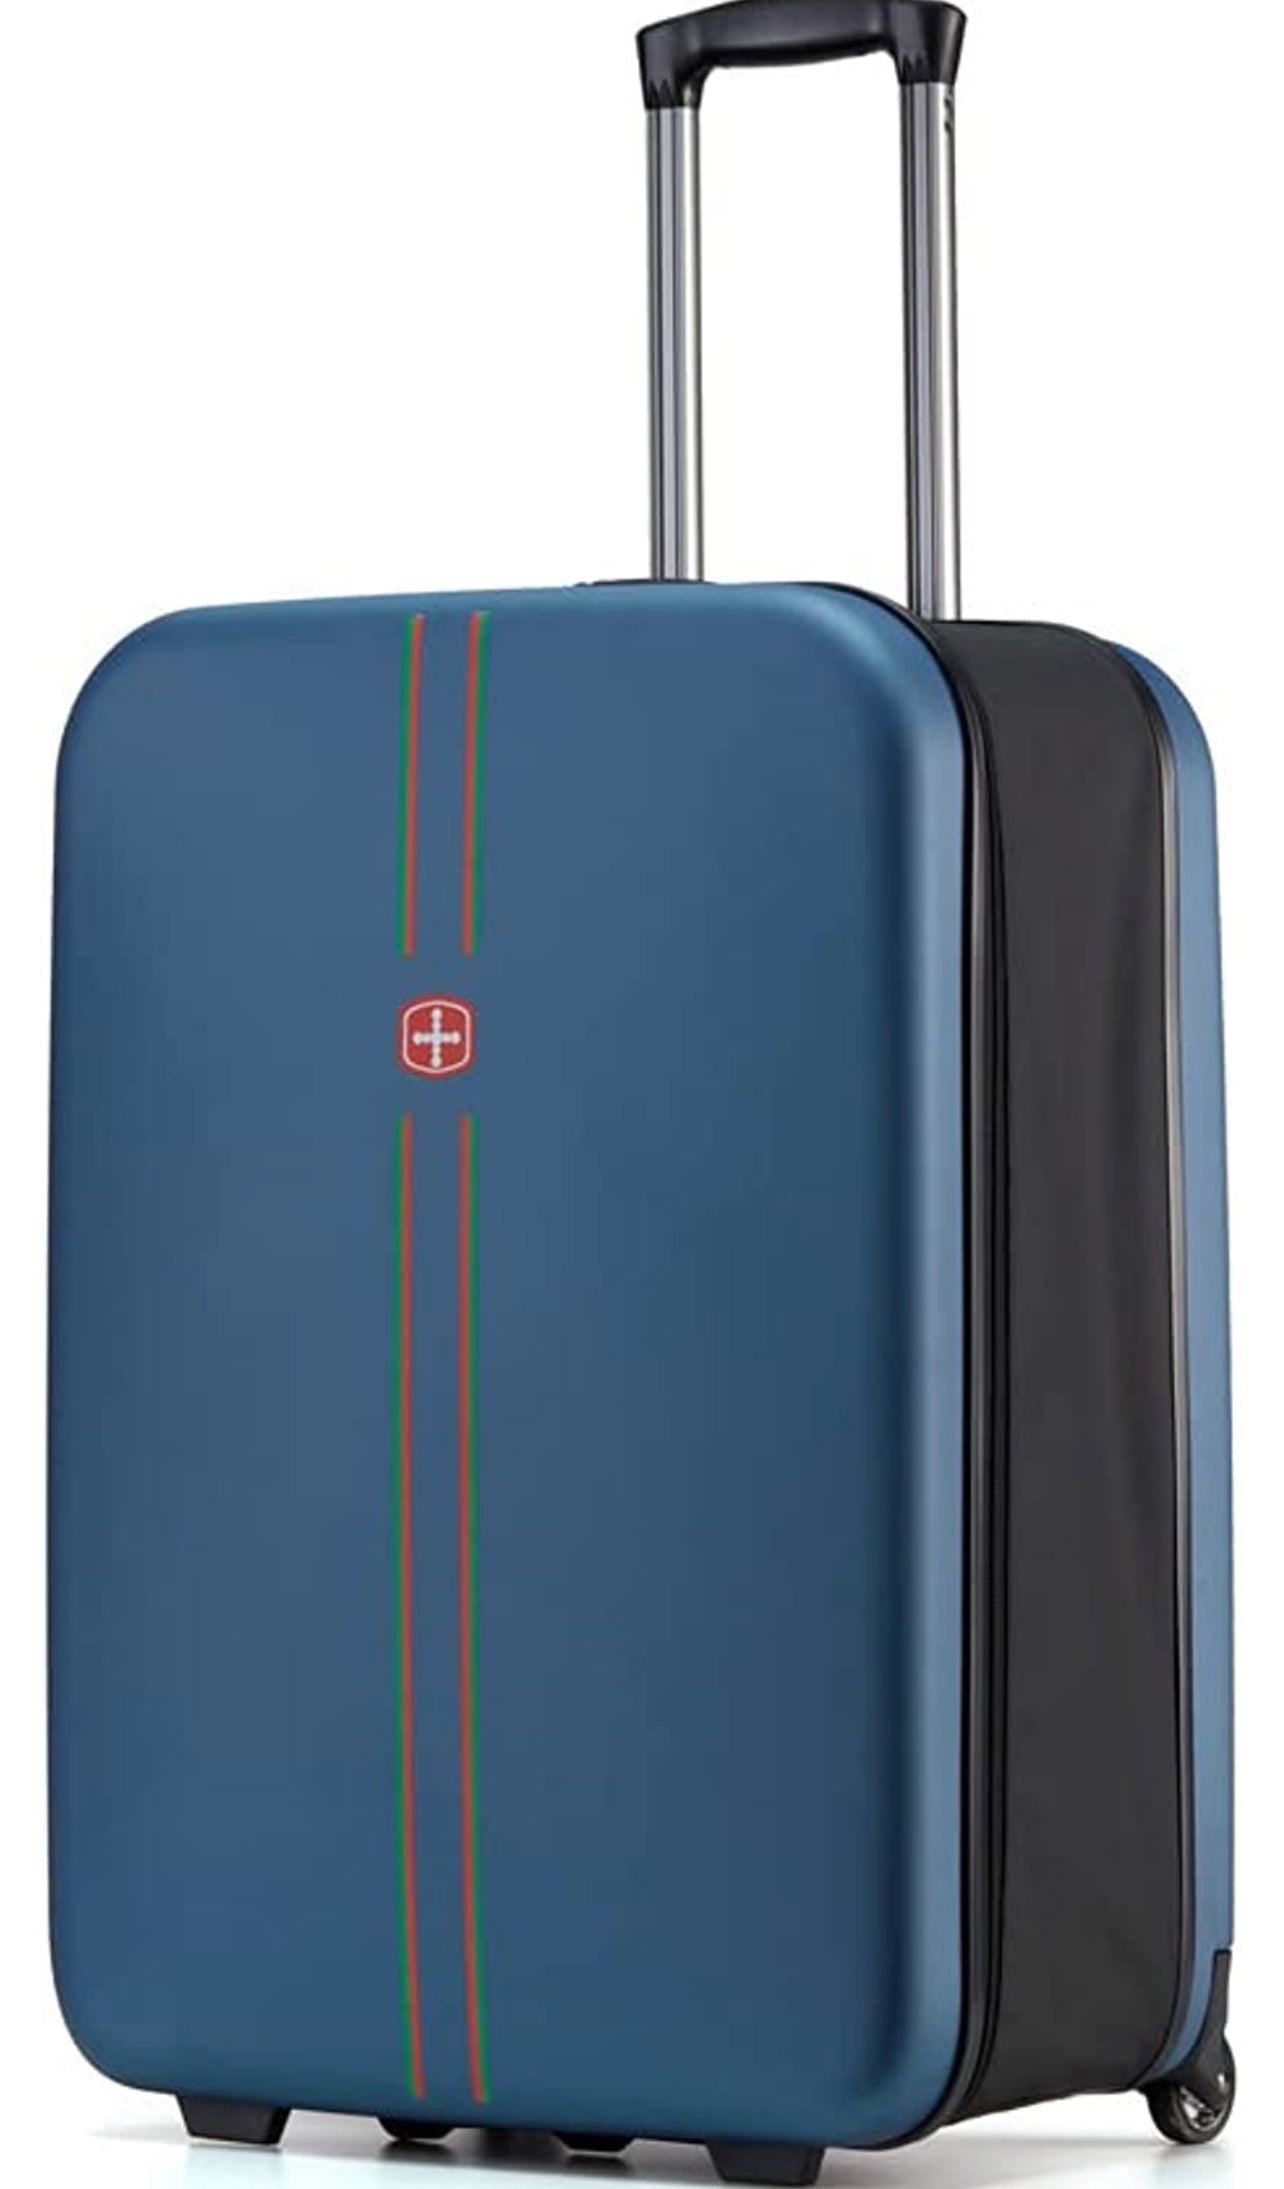 Collapsible Compact Luggage 20 Inch Suitcase Travel Light Foldable Carry-on Suitcase - Blue - MyTravelShop.ca